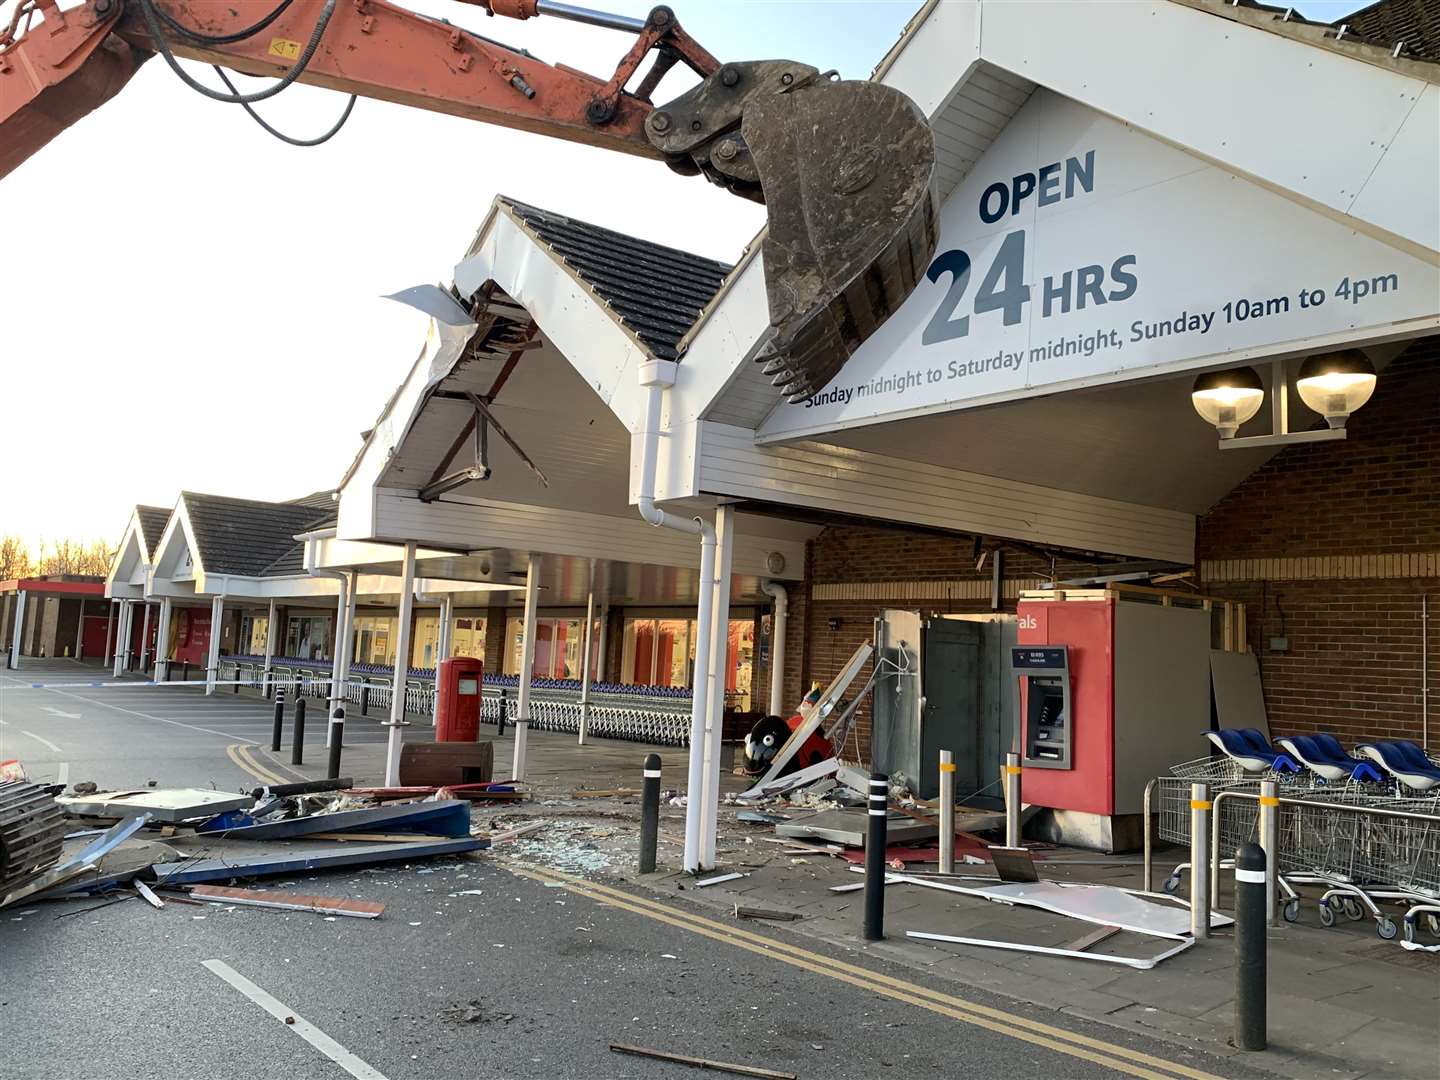 A digger has been left at the scene of the suspected ram raid Picture: Brian Brown